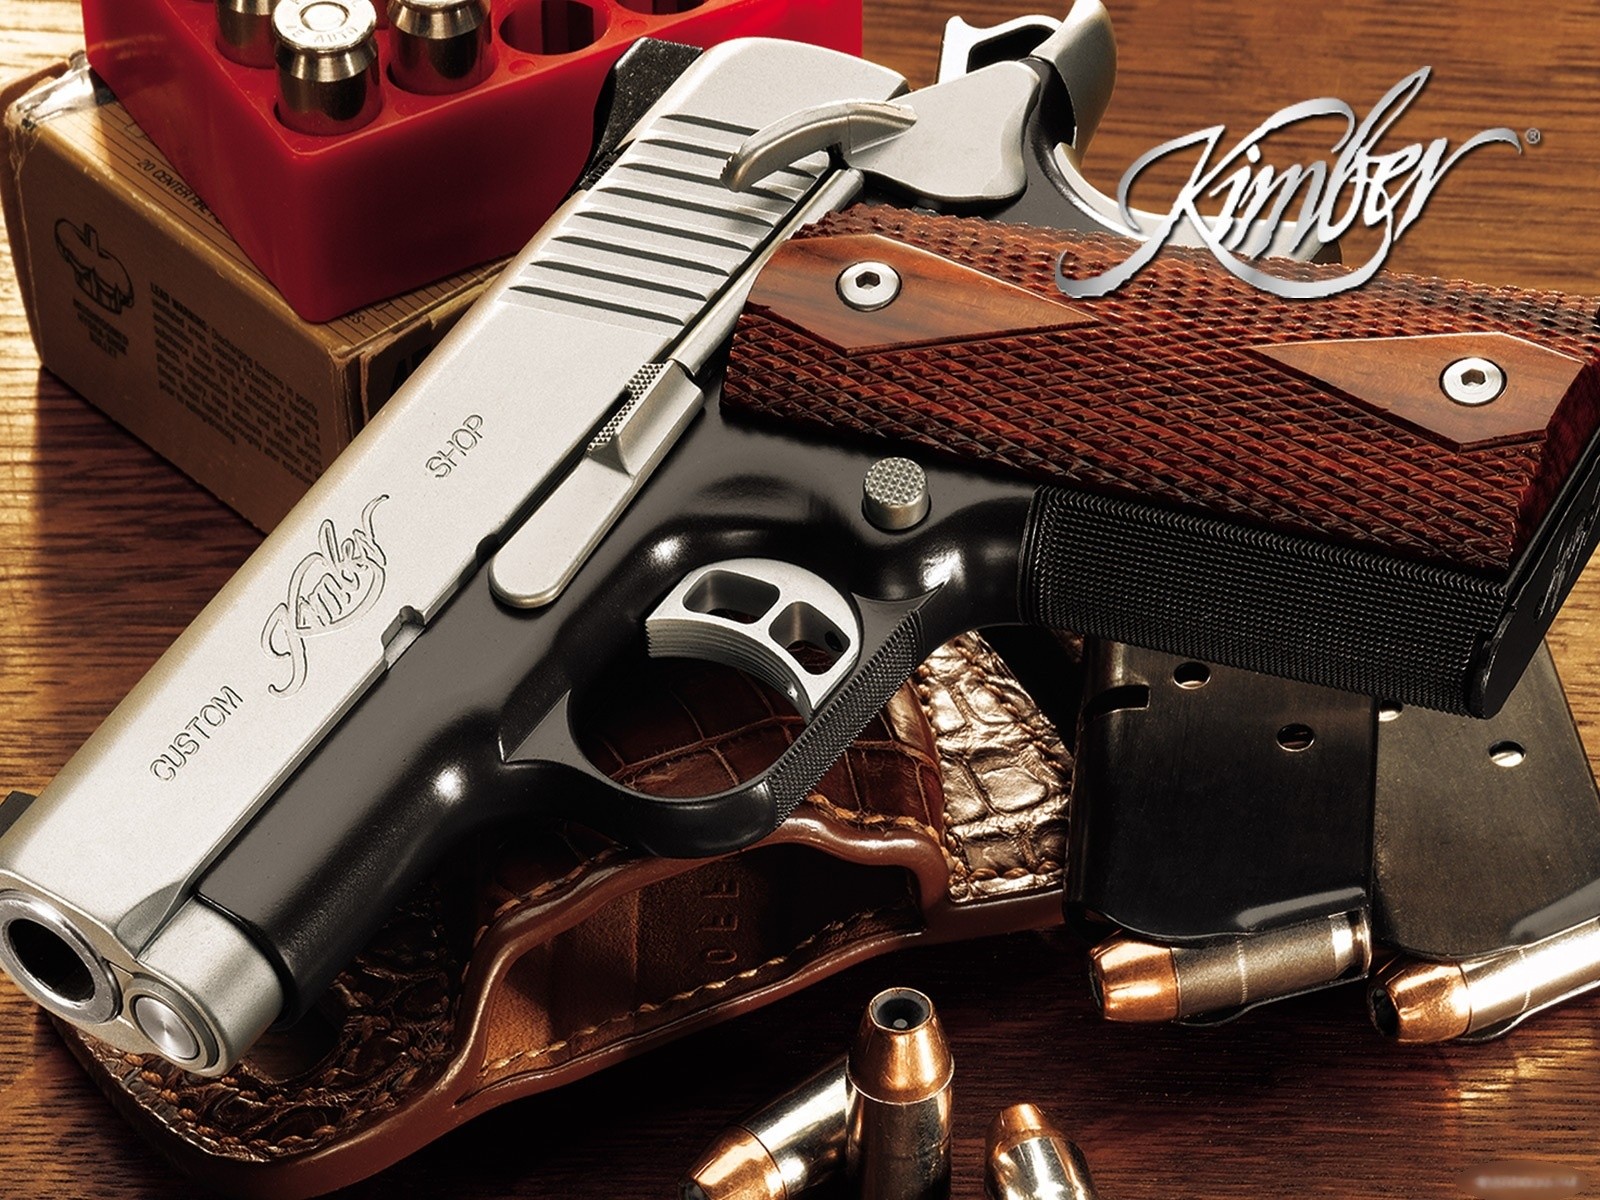 Kimber Pistol Wallpaper And Background Image Id